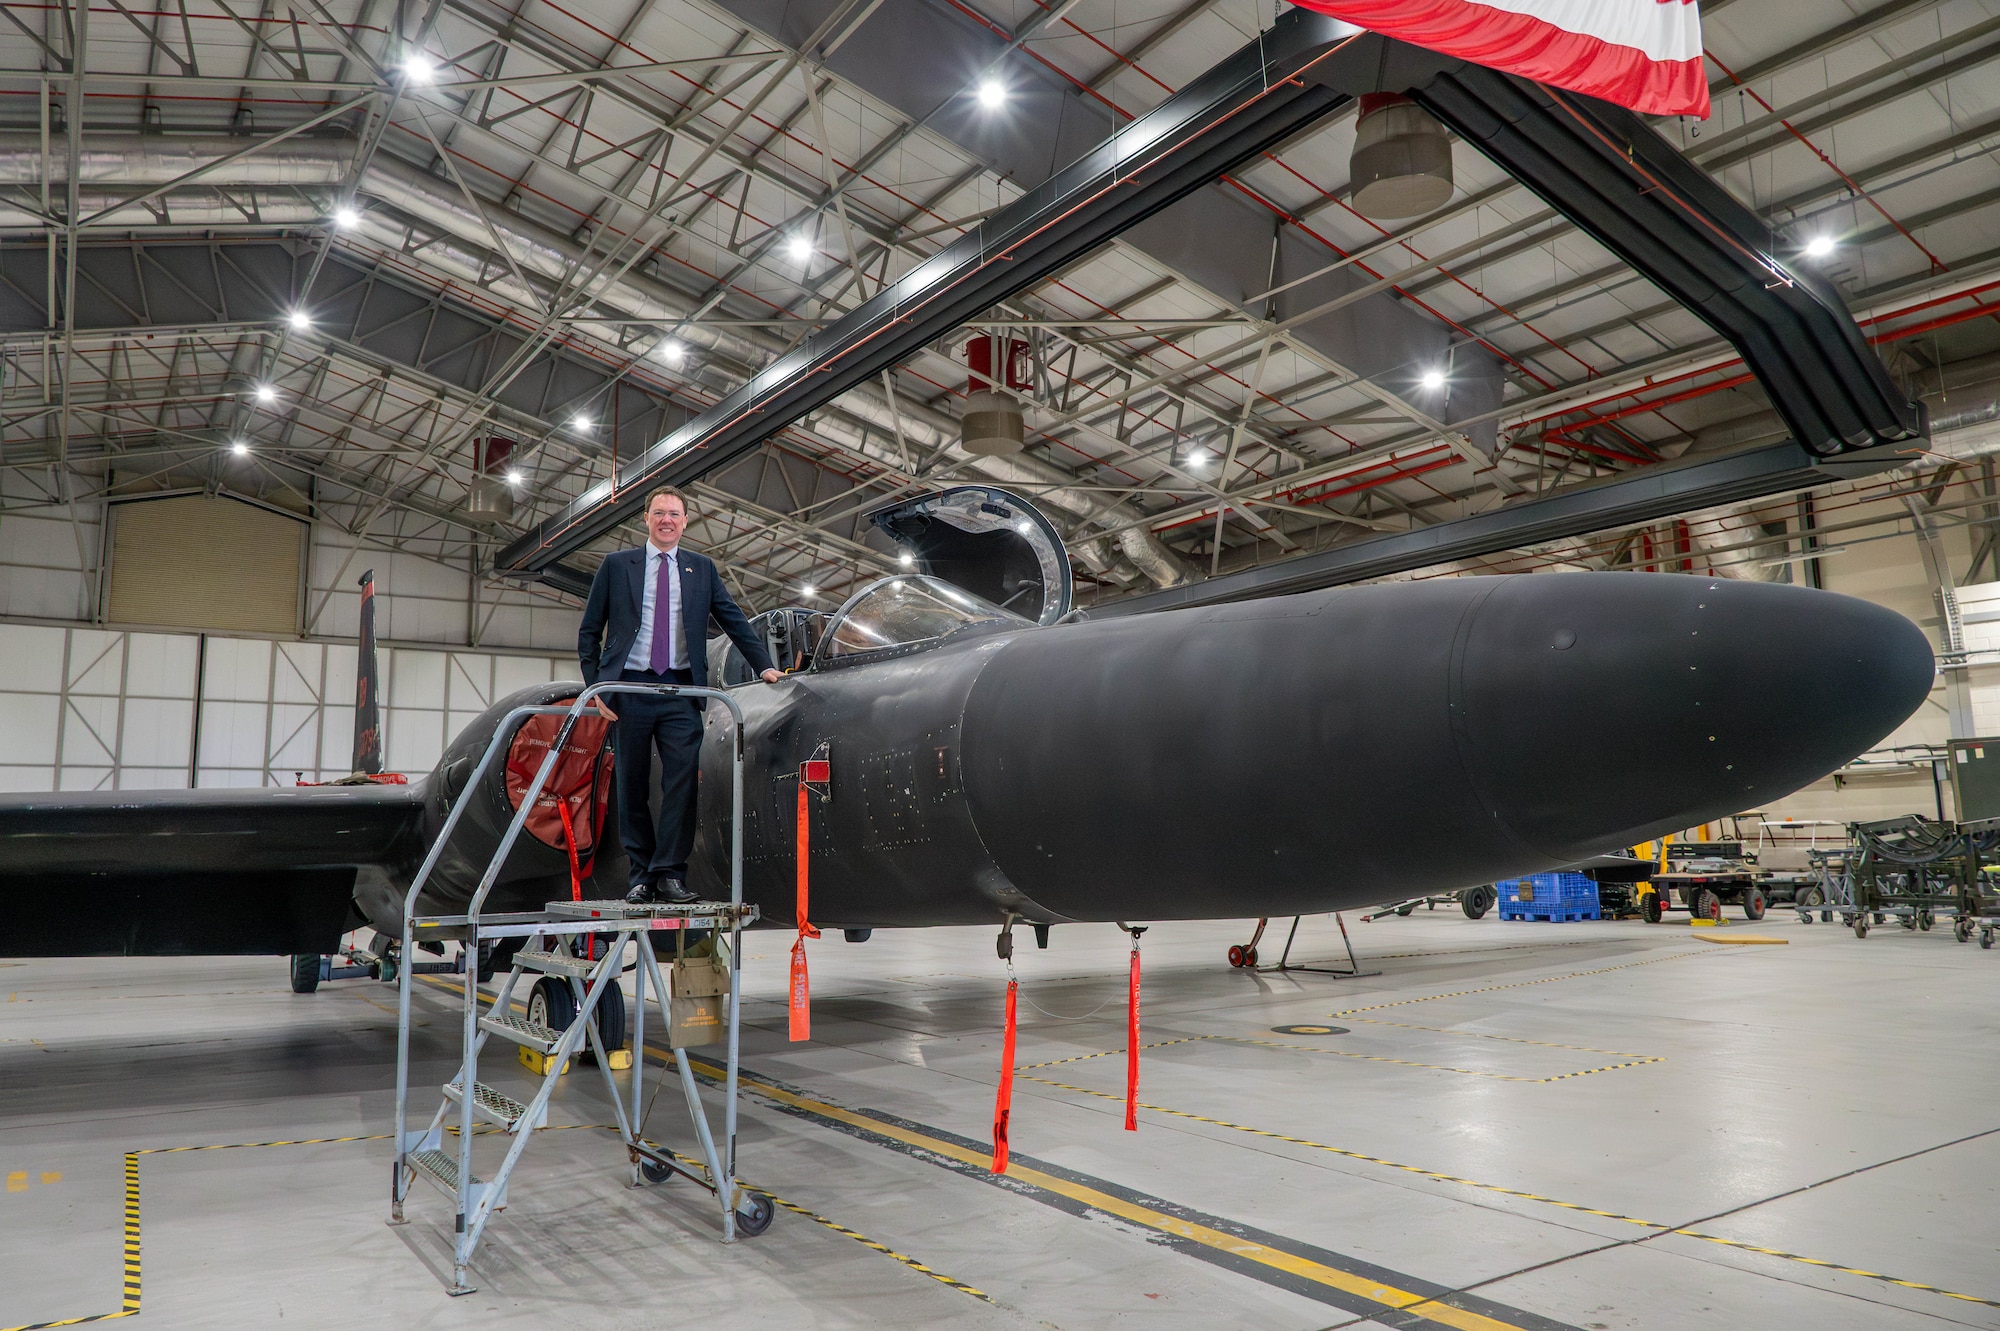 Robert Courts poses for a photo with a U-2 Dragon Lady